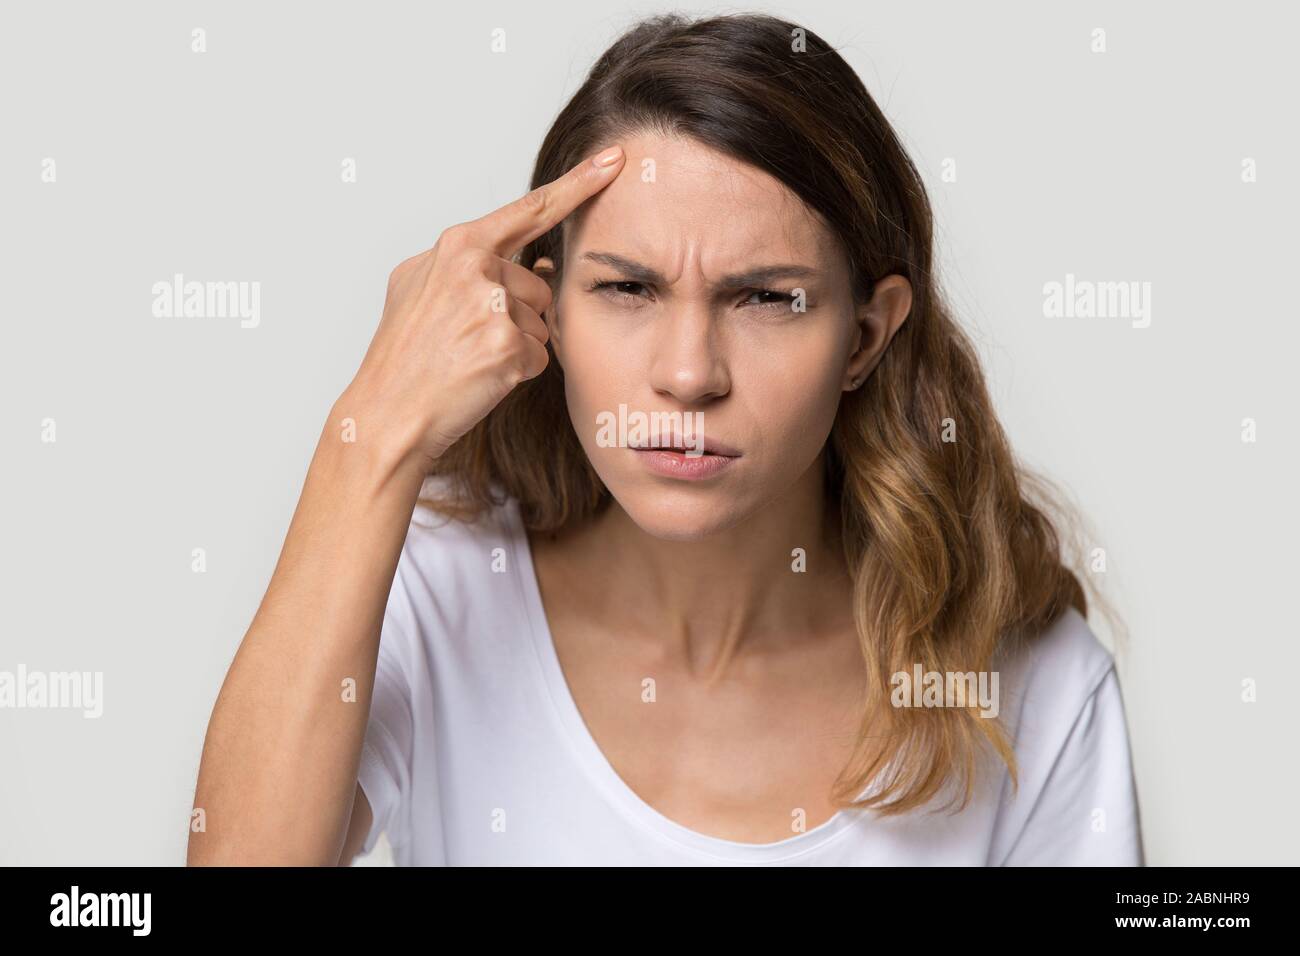 Unhappy young woman touching forehead, worried about acne or wrinkle Stock Photo